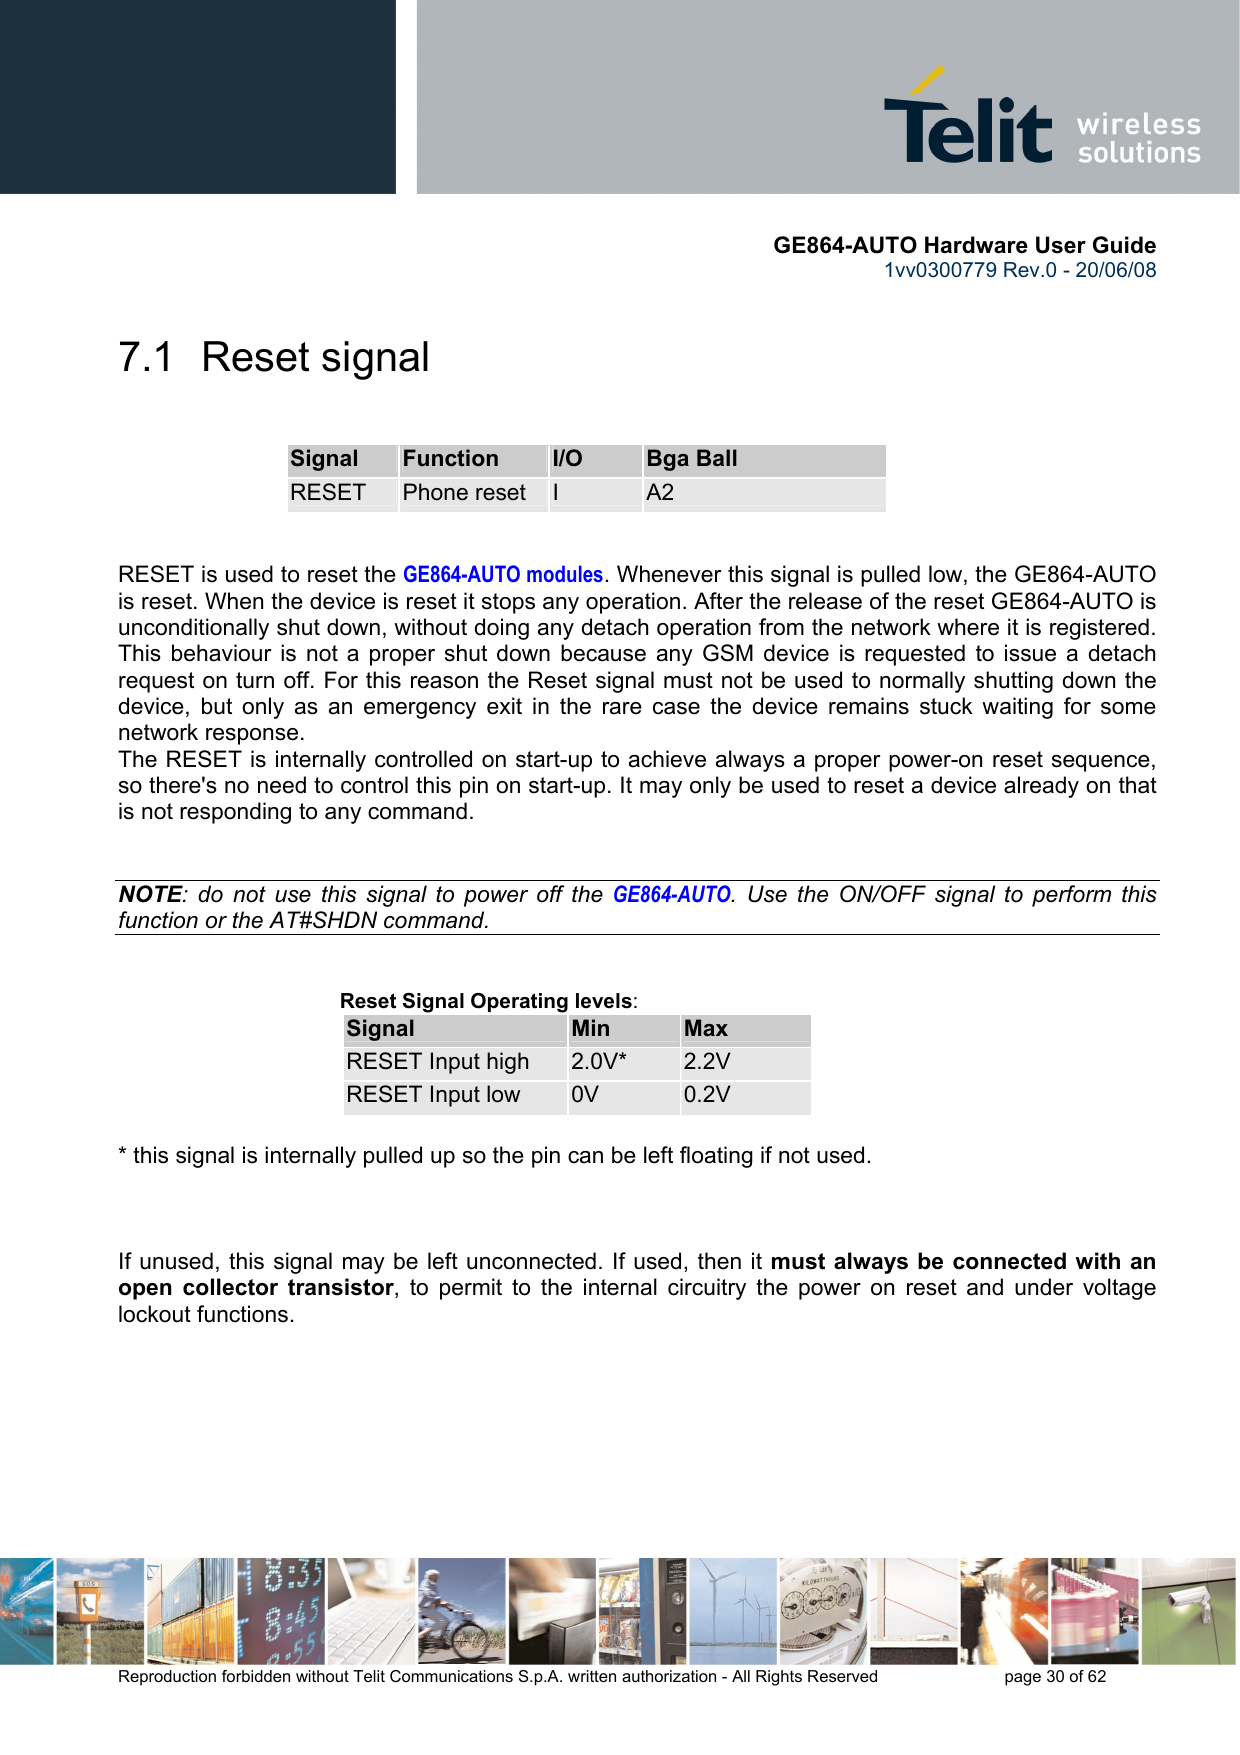       GE864-AUTO Hardware User Guide 1vv0300779 Rev.0 - 20/06/08      Reproduction forbidden without Telit Communications S.p.A. written authorization - All Rights Reserved    page 30 of 62  7.1 Reset signal  Signal  Function  I/O  Bga Ball RESET  Phone reset  I  A2   RESET is used to reset the GE864-AUTO modules. Whenever this signal is pulled low, the GE864-AUTO is reset. When the device is reset it stops any operation. After the release of the reset GE864-AUTO is unconditionally shut down, without doing any detach operation from the network where it is registered. This behaviour is not a proper shut down because any GSM device is requested to issue a detach request on turn off. For this reason the Reset signal must not be used to normally shutting down the device, but only as an emergency exit in the rare case the device remains stuck waiting for some network response. The RESET is internally controlled on start-up to achieve always a proper power-on reset sequence, so there&apos;s no need to control this pin on start-up. It may only be used to reset a device already on that is not responding to any command.   NOTE: do not use this signal to power off the GE864-AUTO. Use the ON/OFF signal to perform this function or the AT#SHDN command.   Reset Signal Operating levels: Signal  Min  Max RESET Input high  2.0V*  2.2V RESET Input low  0V  0.2V  * this signal is internally pulled up so the pin can be left floating if not used.    If unused, this signal may be left unconnected. If used, then it must always be connected with an open collector transistor, to permit to the internal circuitry the power on reset and under voltage lockout functions.        